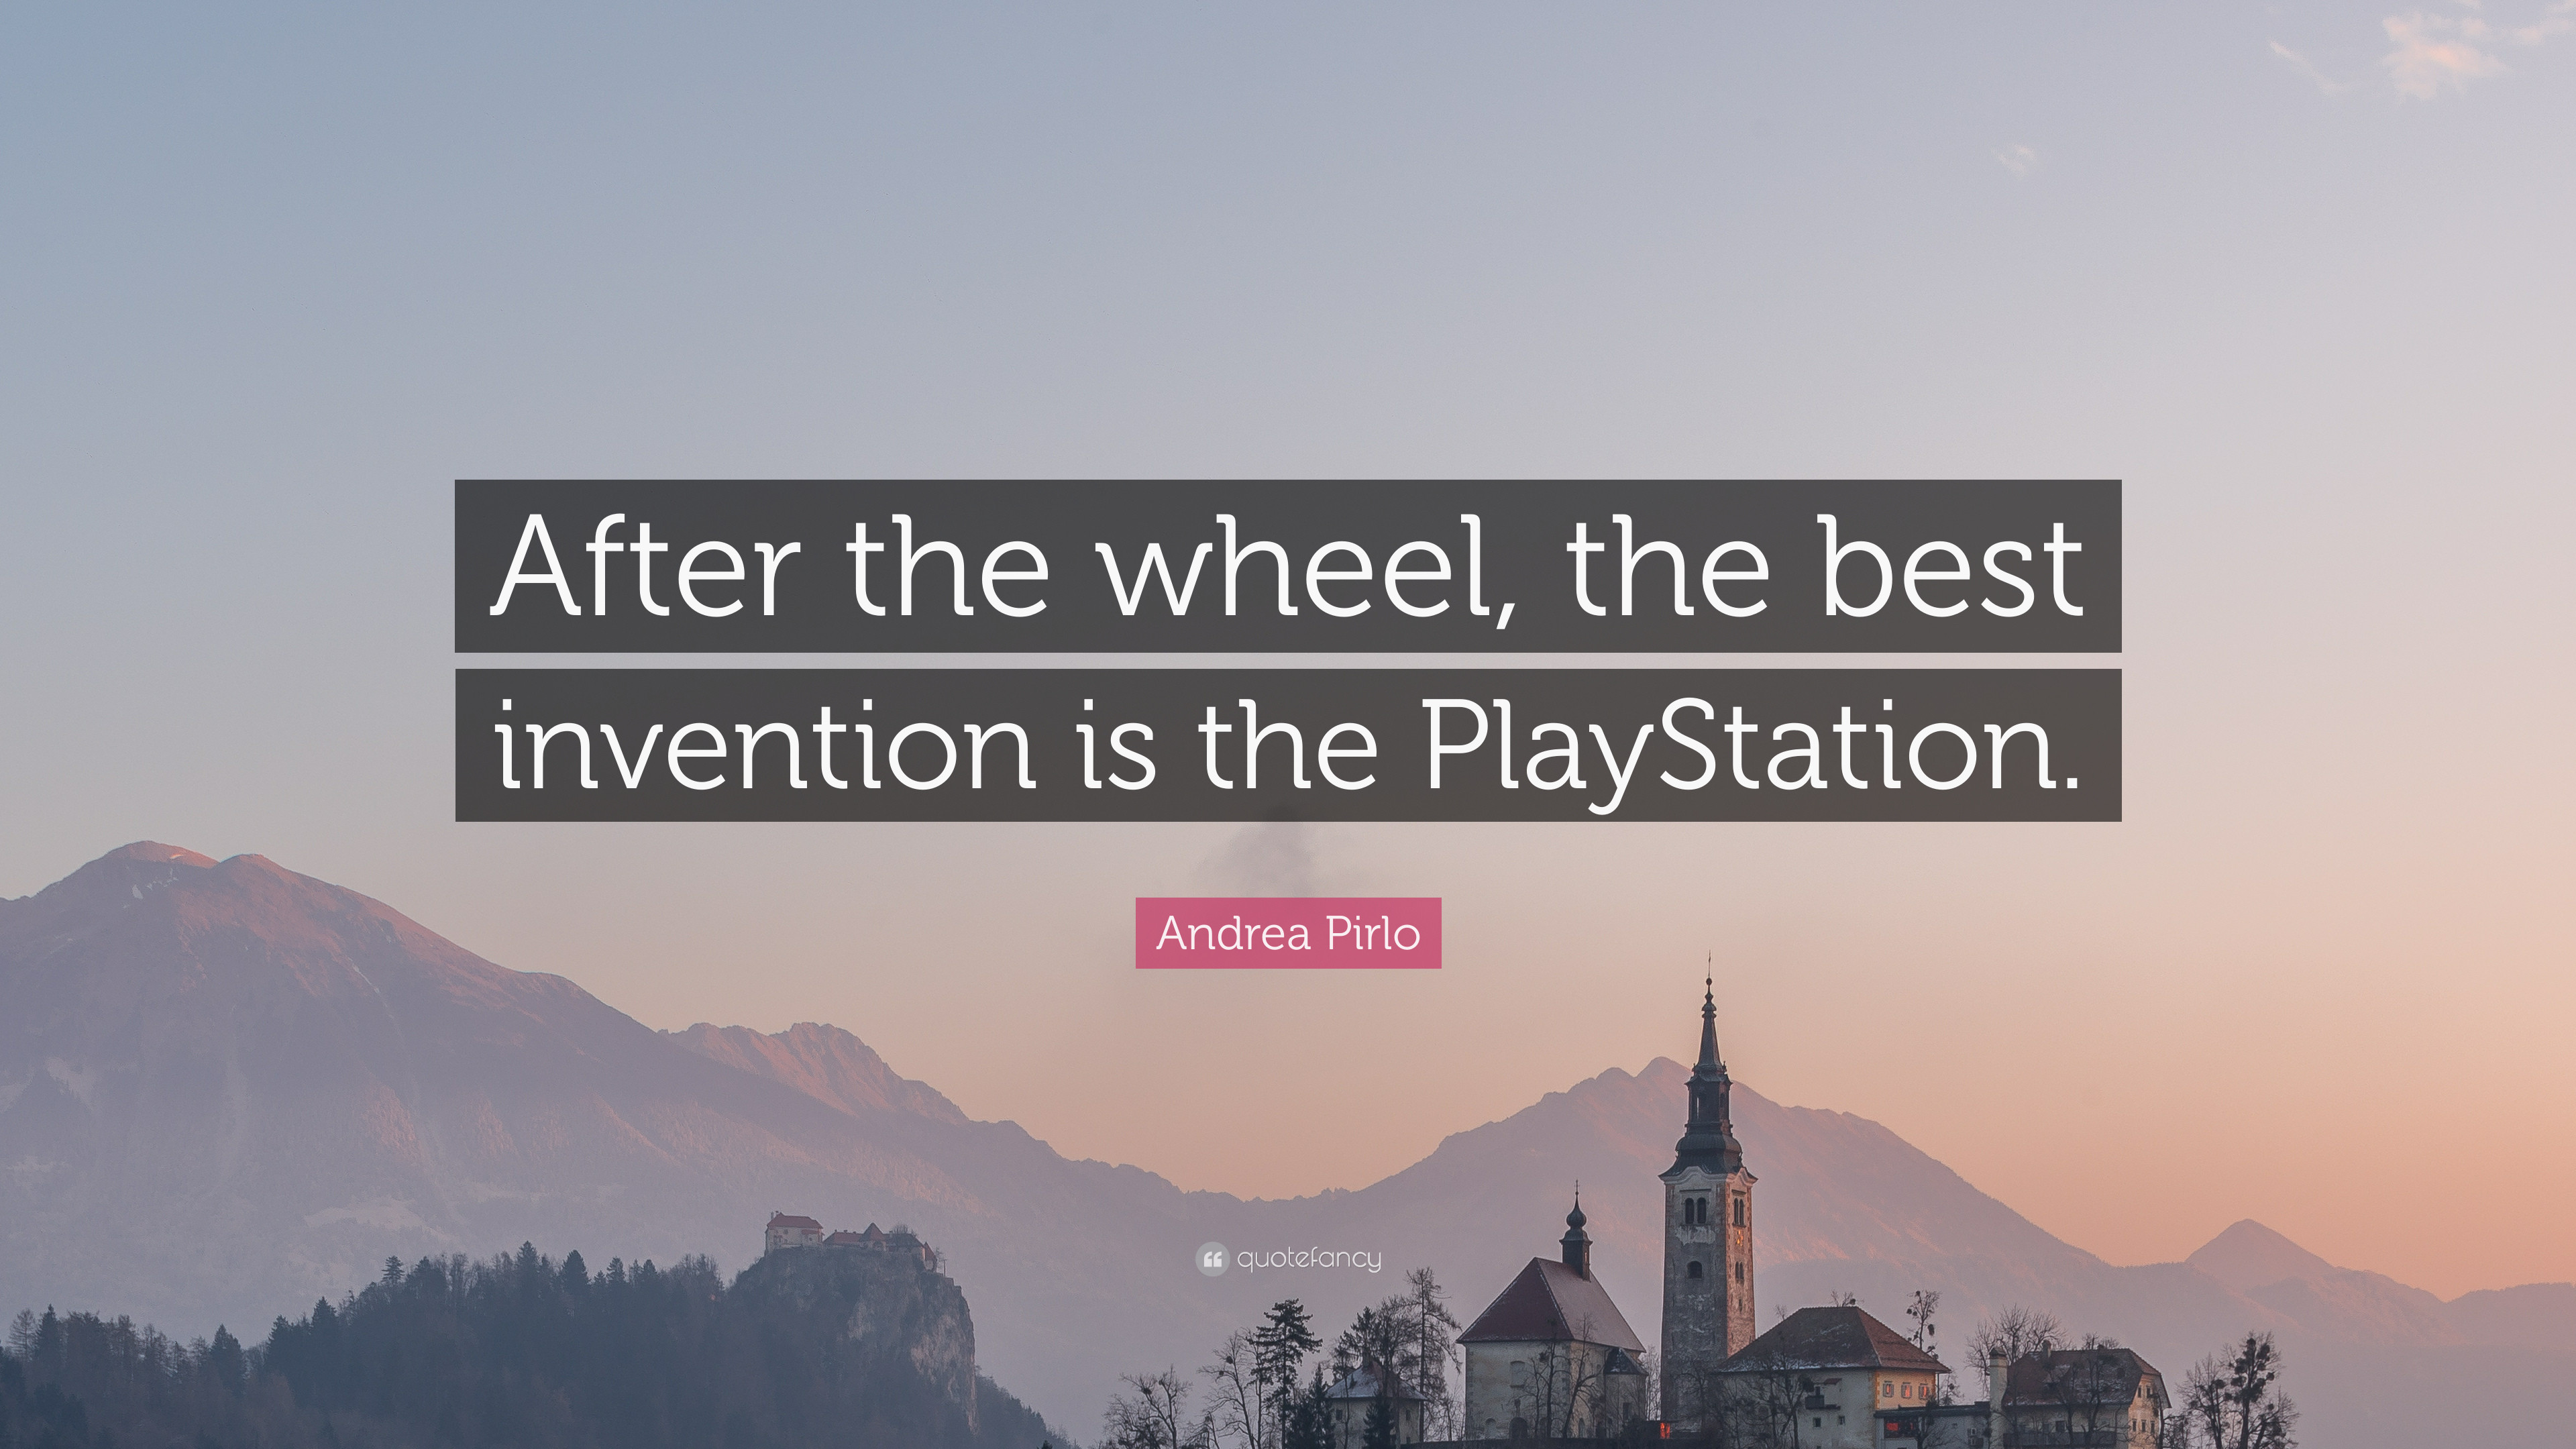 3840x2160 Andrea Pirlo Quote: “After the wheel, the best invention is the PlayStation.